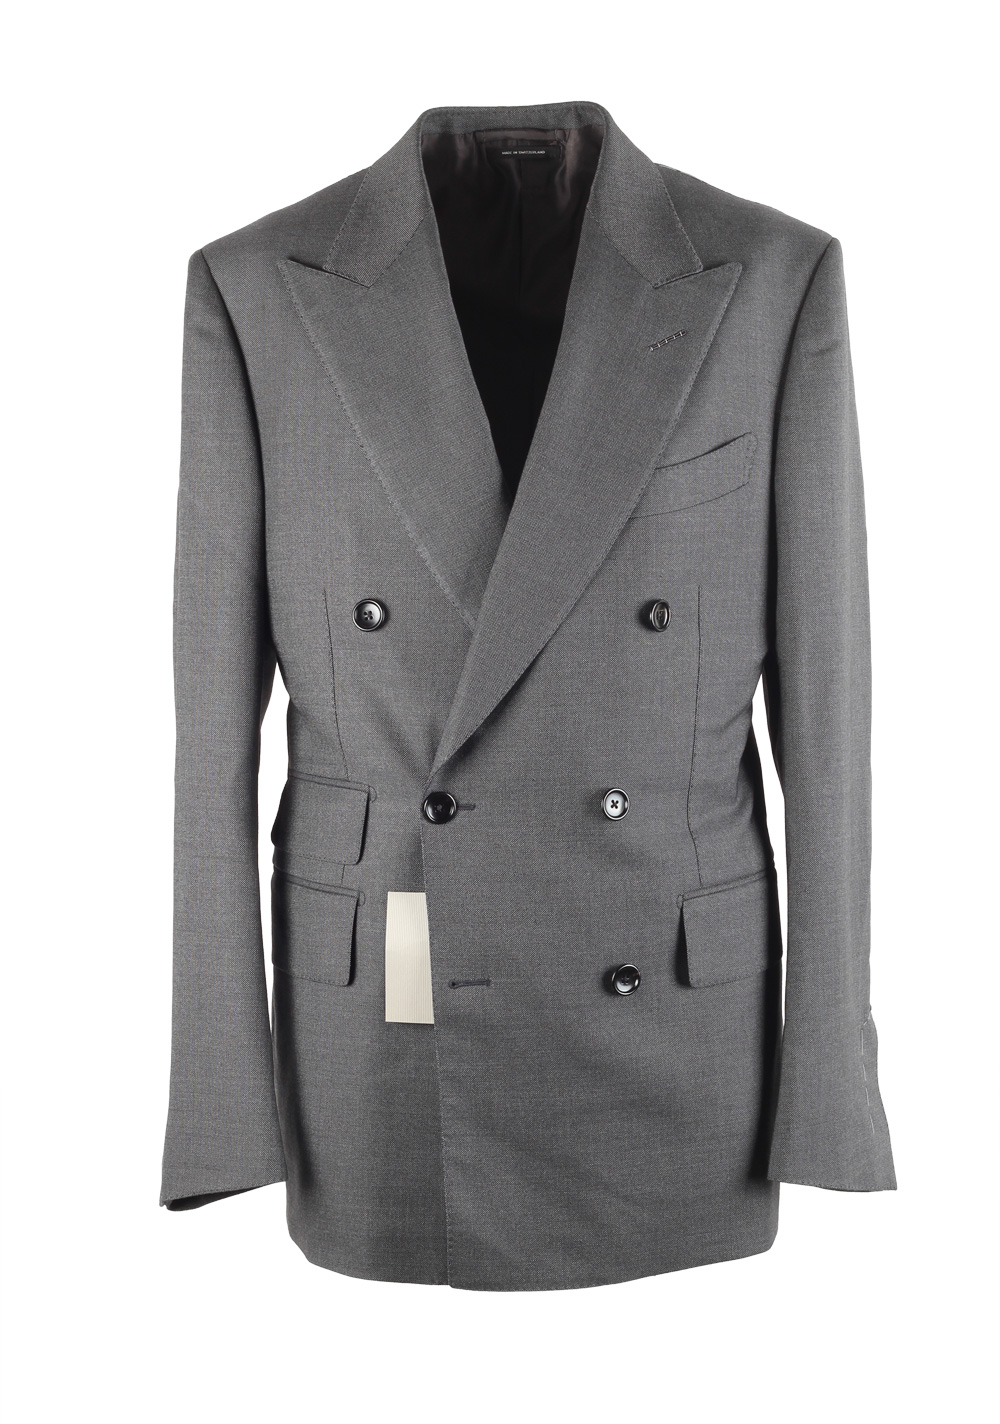 TOM FORD Shelton Gray Double Breasted Suit Size 48 / 38R U.S. | Costume ...